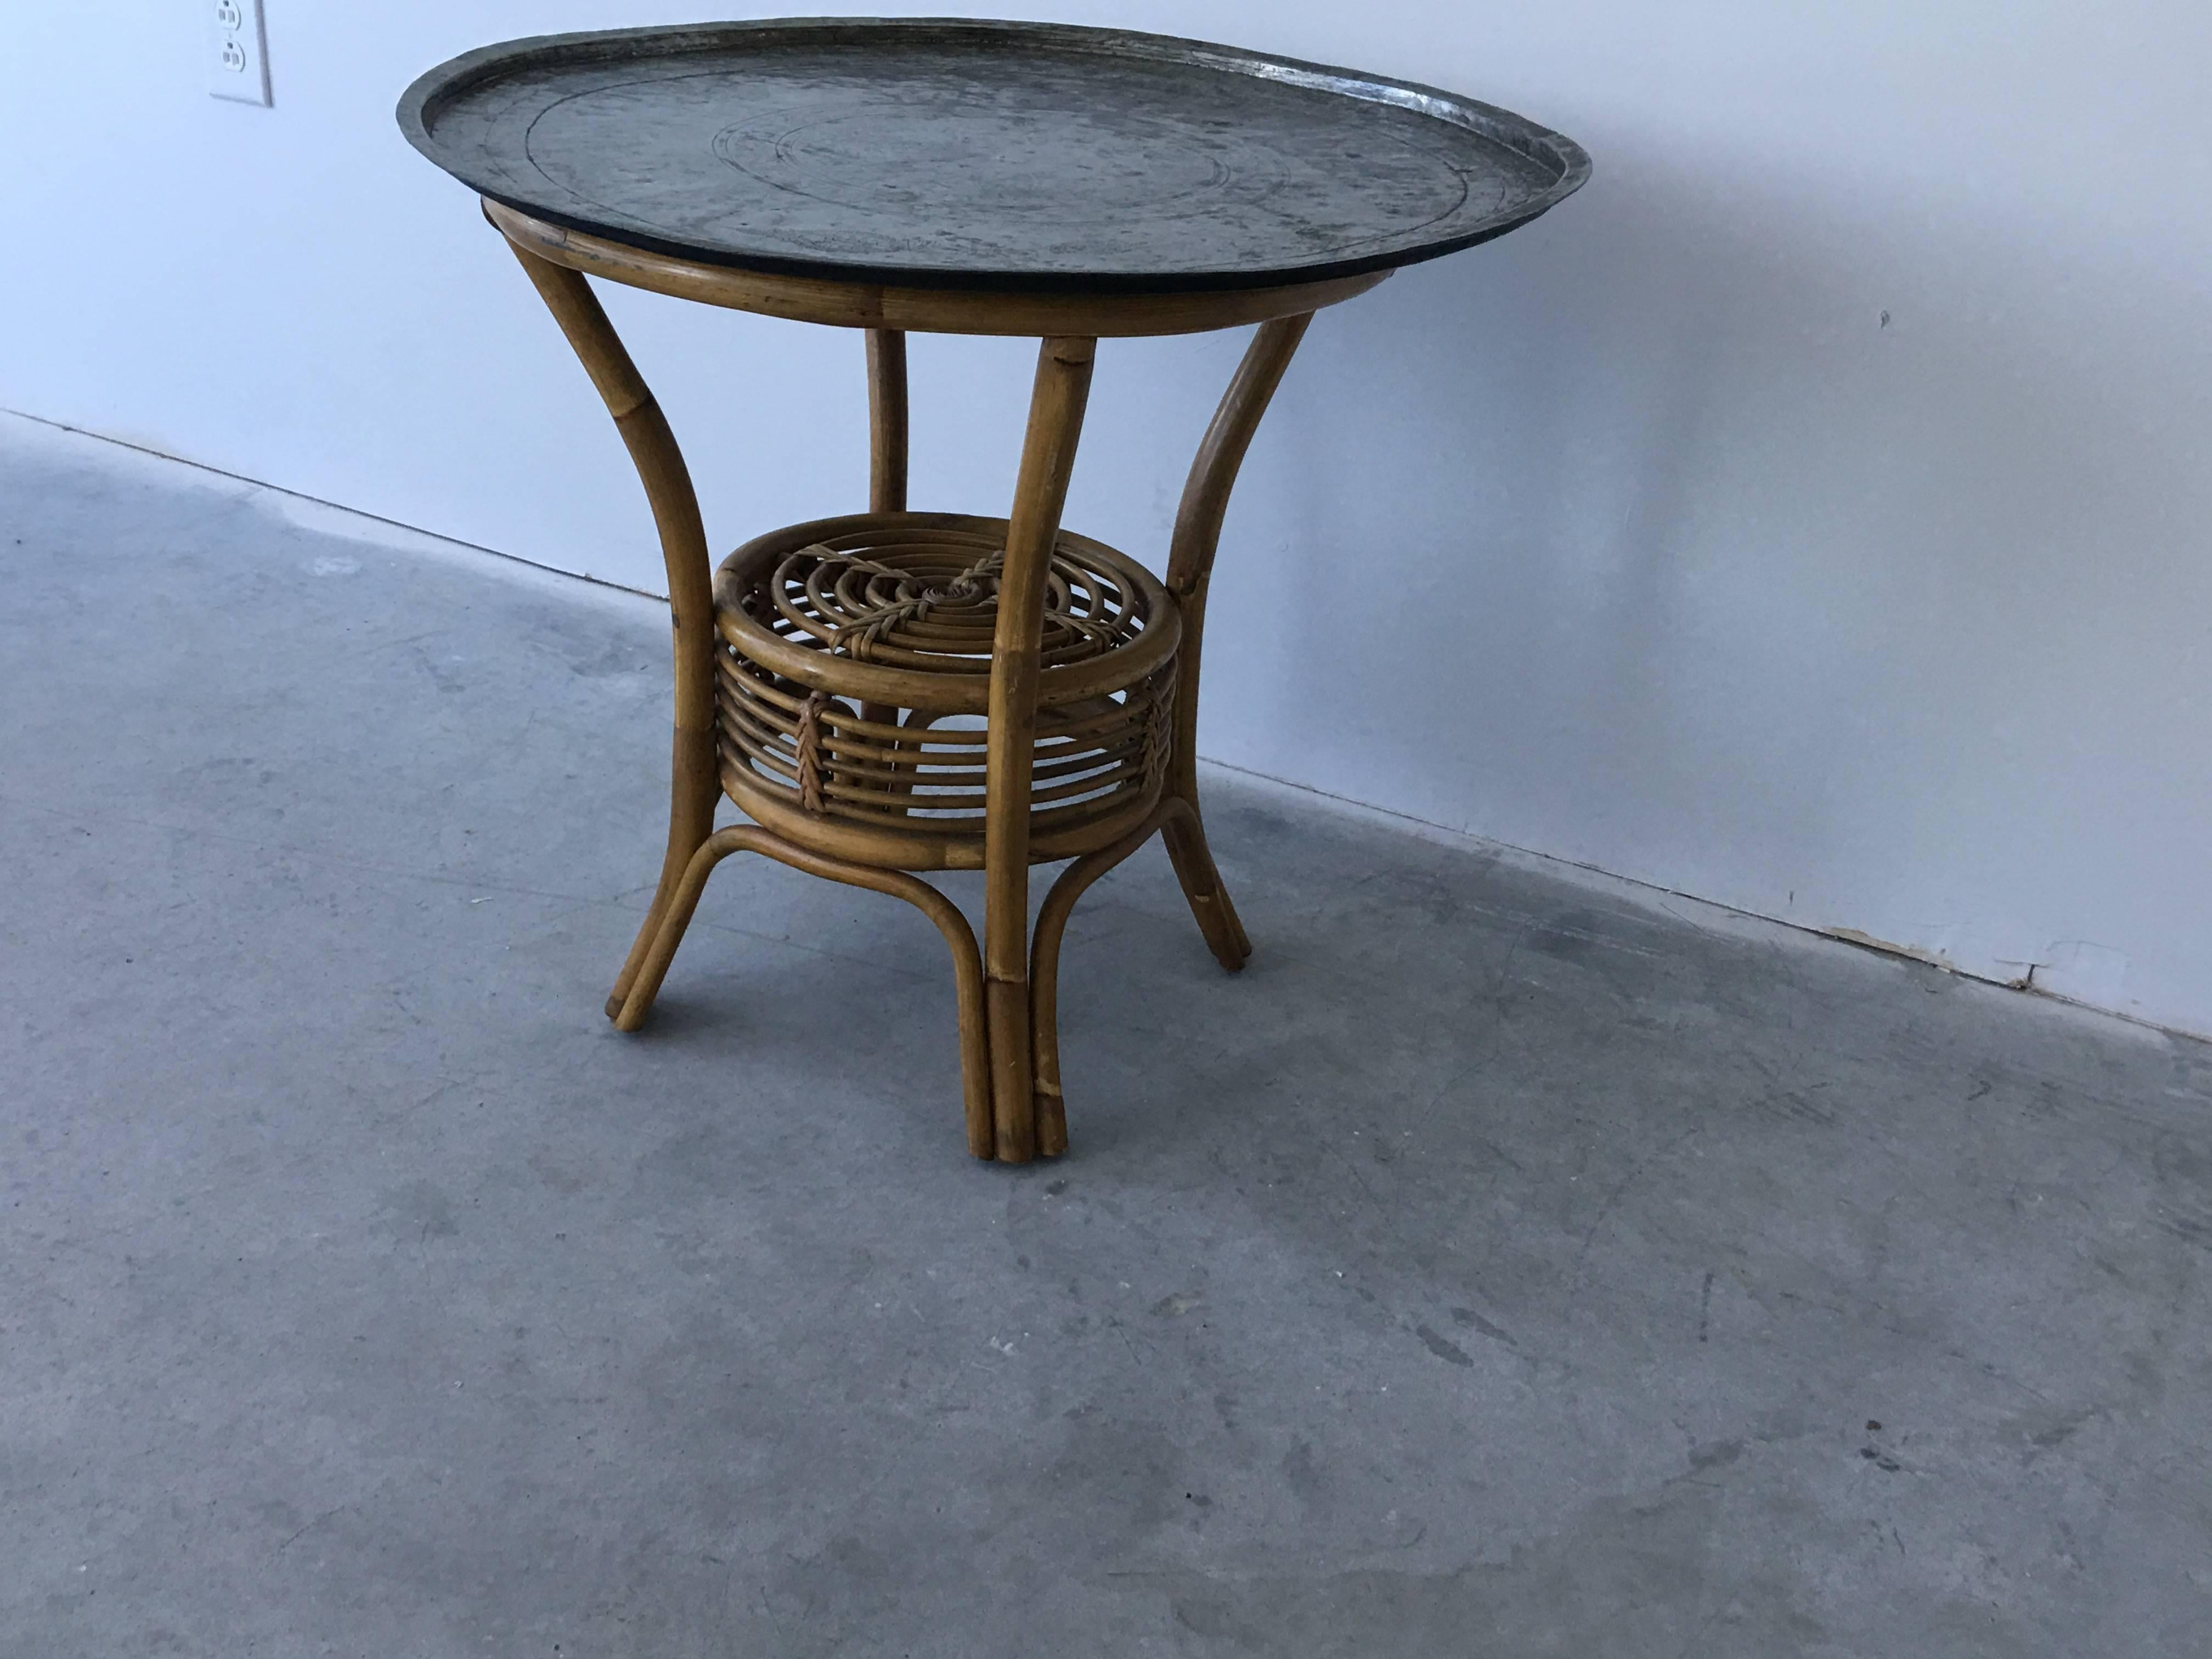 Offered is a beautiful, Mid-Century tray table. The metal tray top is hand-hammered and hand-etched with a mandala and floral motif. We believe the top is antique Moroccan, though the base much more recent (1950s). The base is bamboo and rattan.